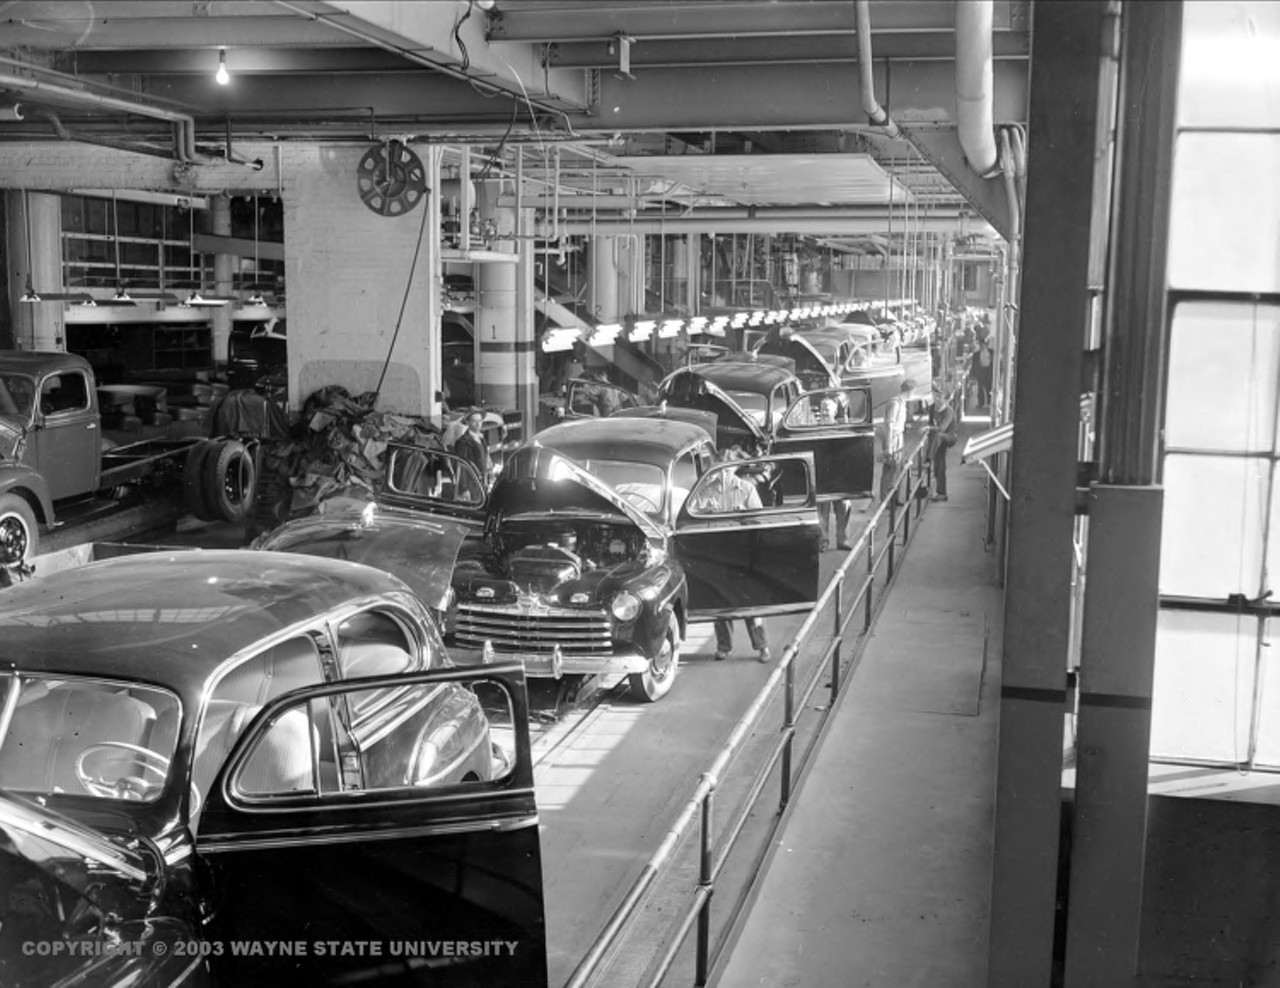 The Assembly Line
Henry Ford’s use of assembly lines revolutionized manufacturing, making mass production of automobiles more efficient and affordable. This approach transformed not only the automotive industry but also influenced manufacturing methods across various sectors globally.